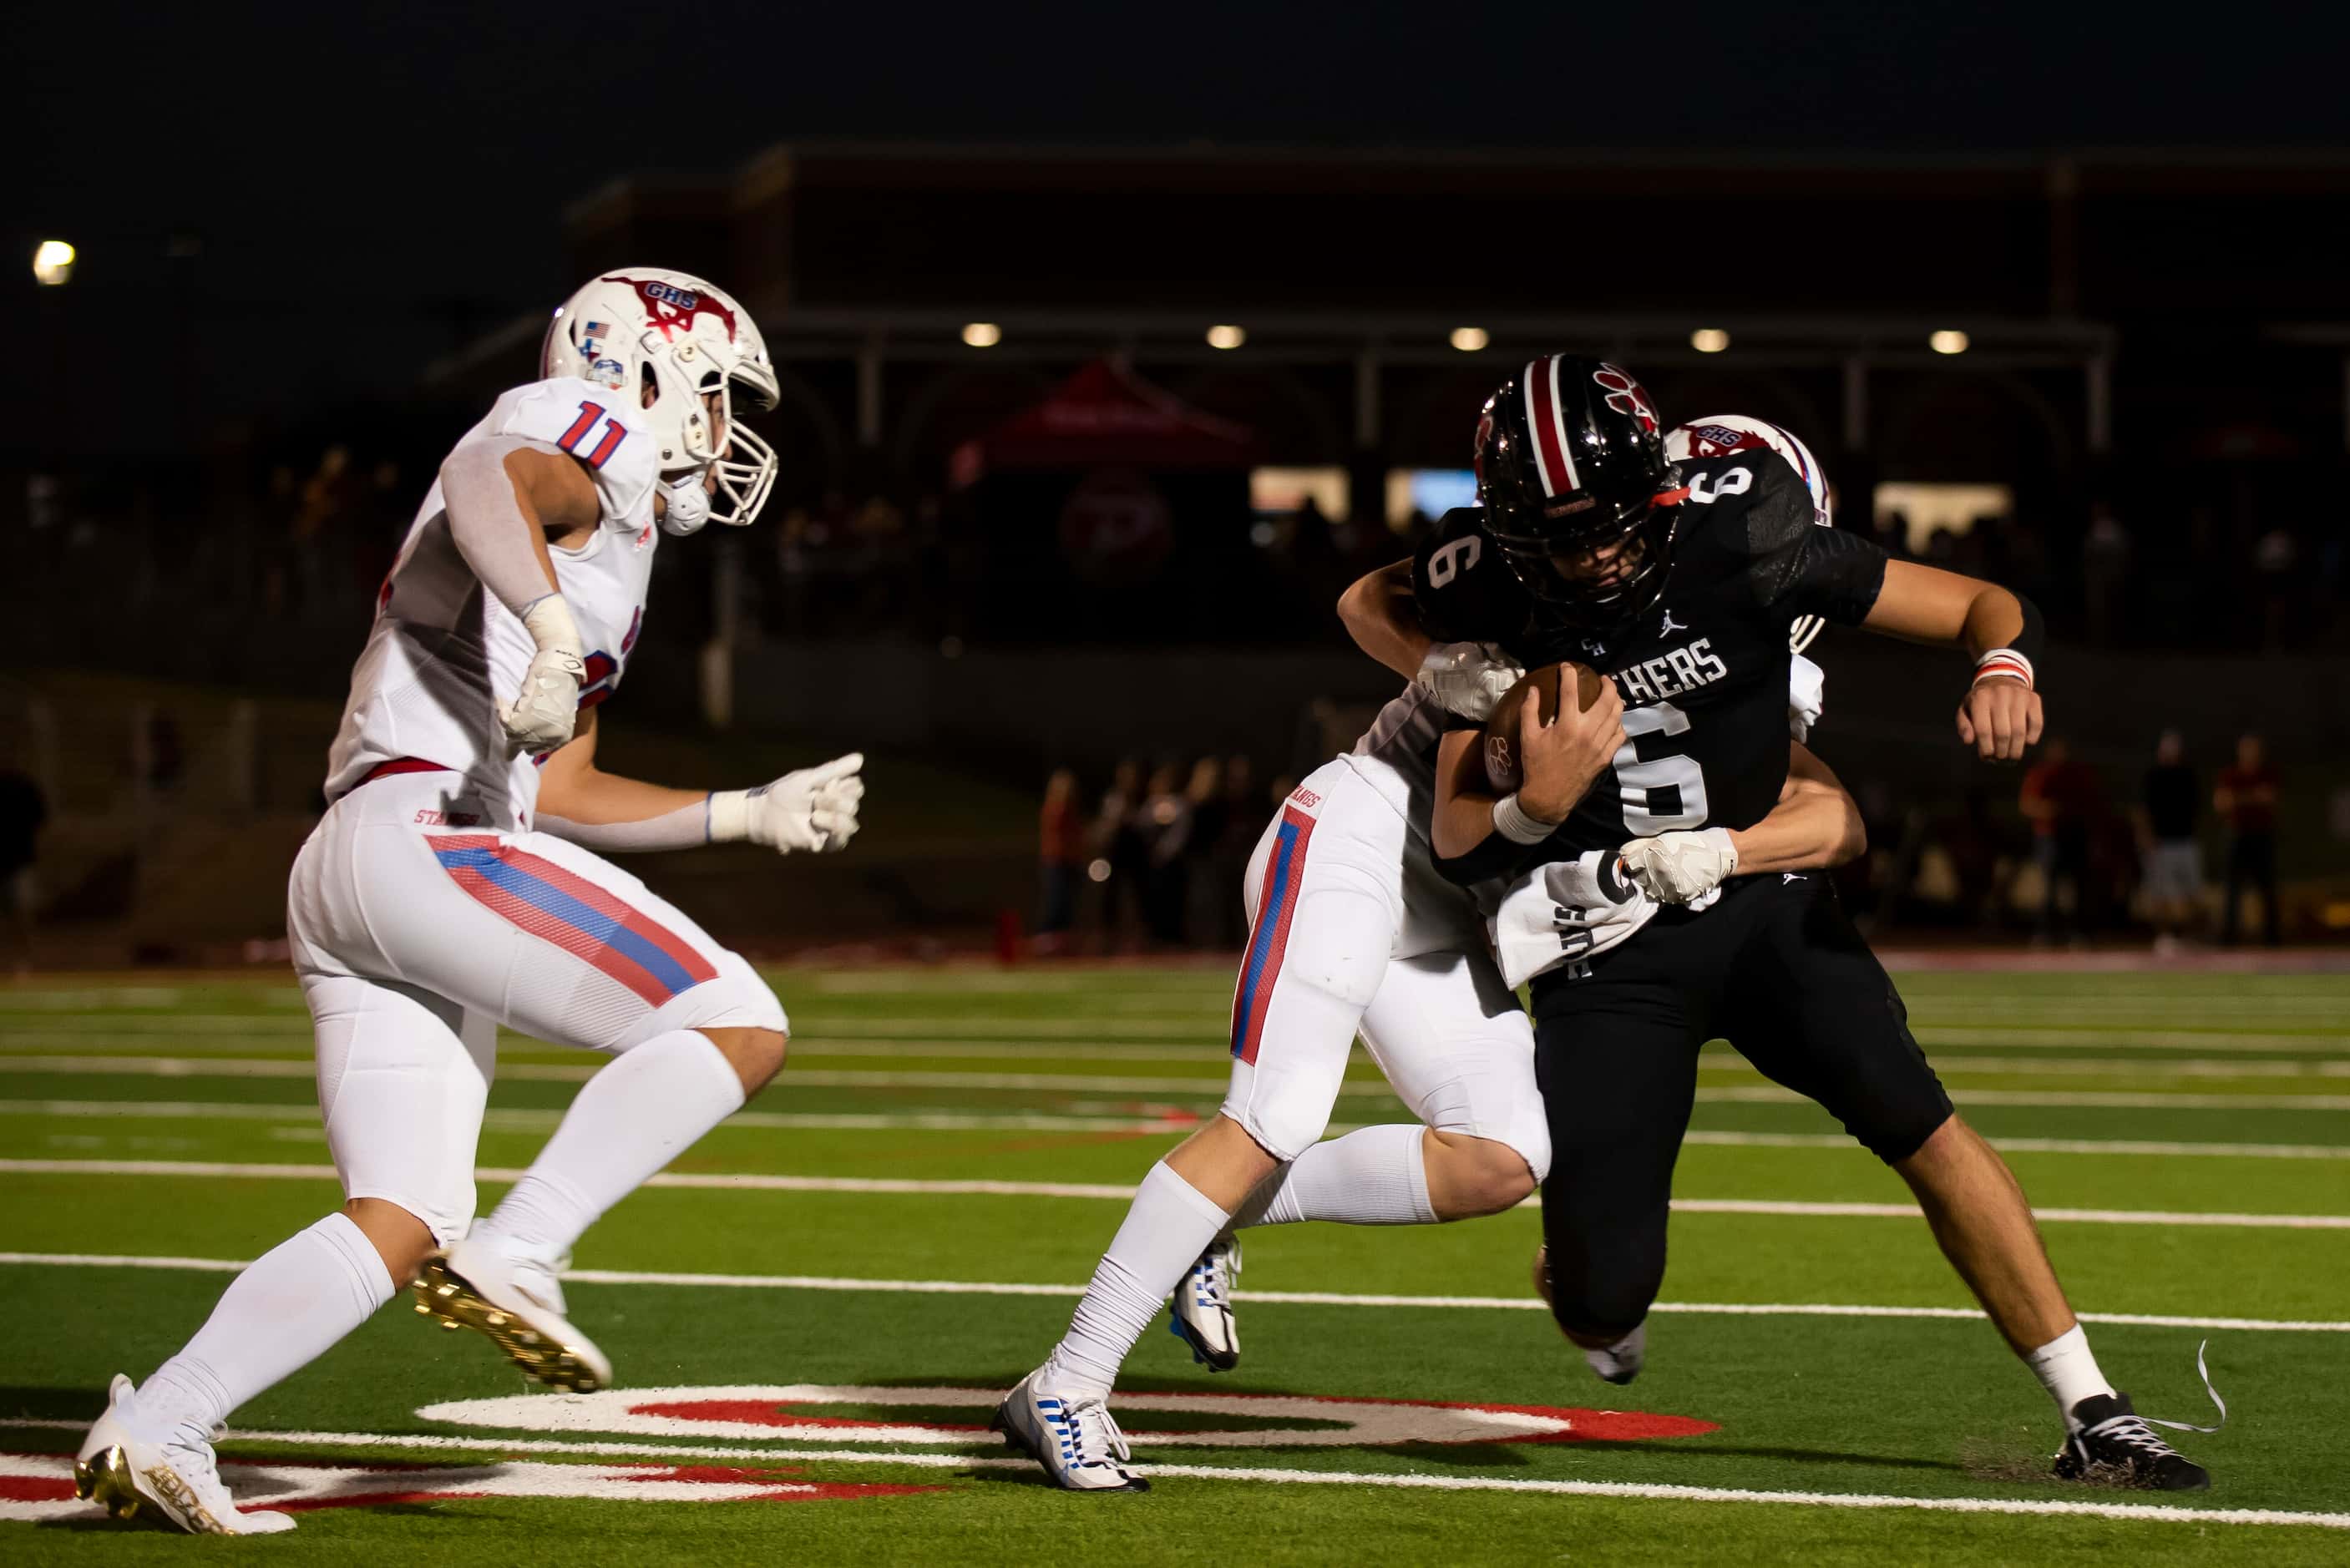 Colleyville senior Weston Smith (6) is tackled by Grapevine senior Hunter Lasher (25) during...